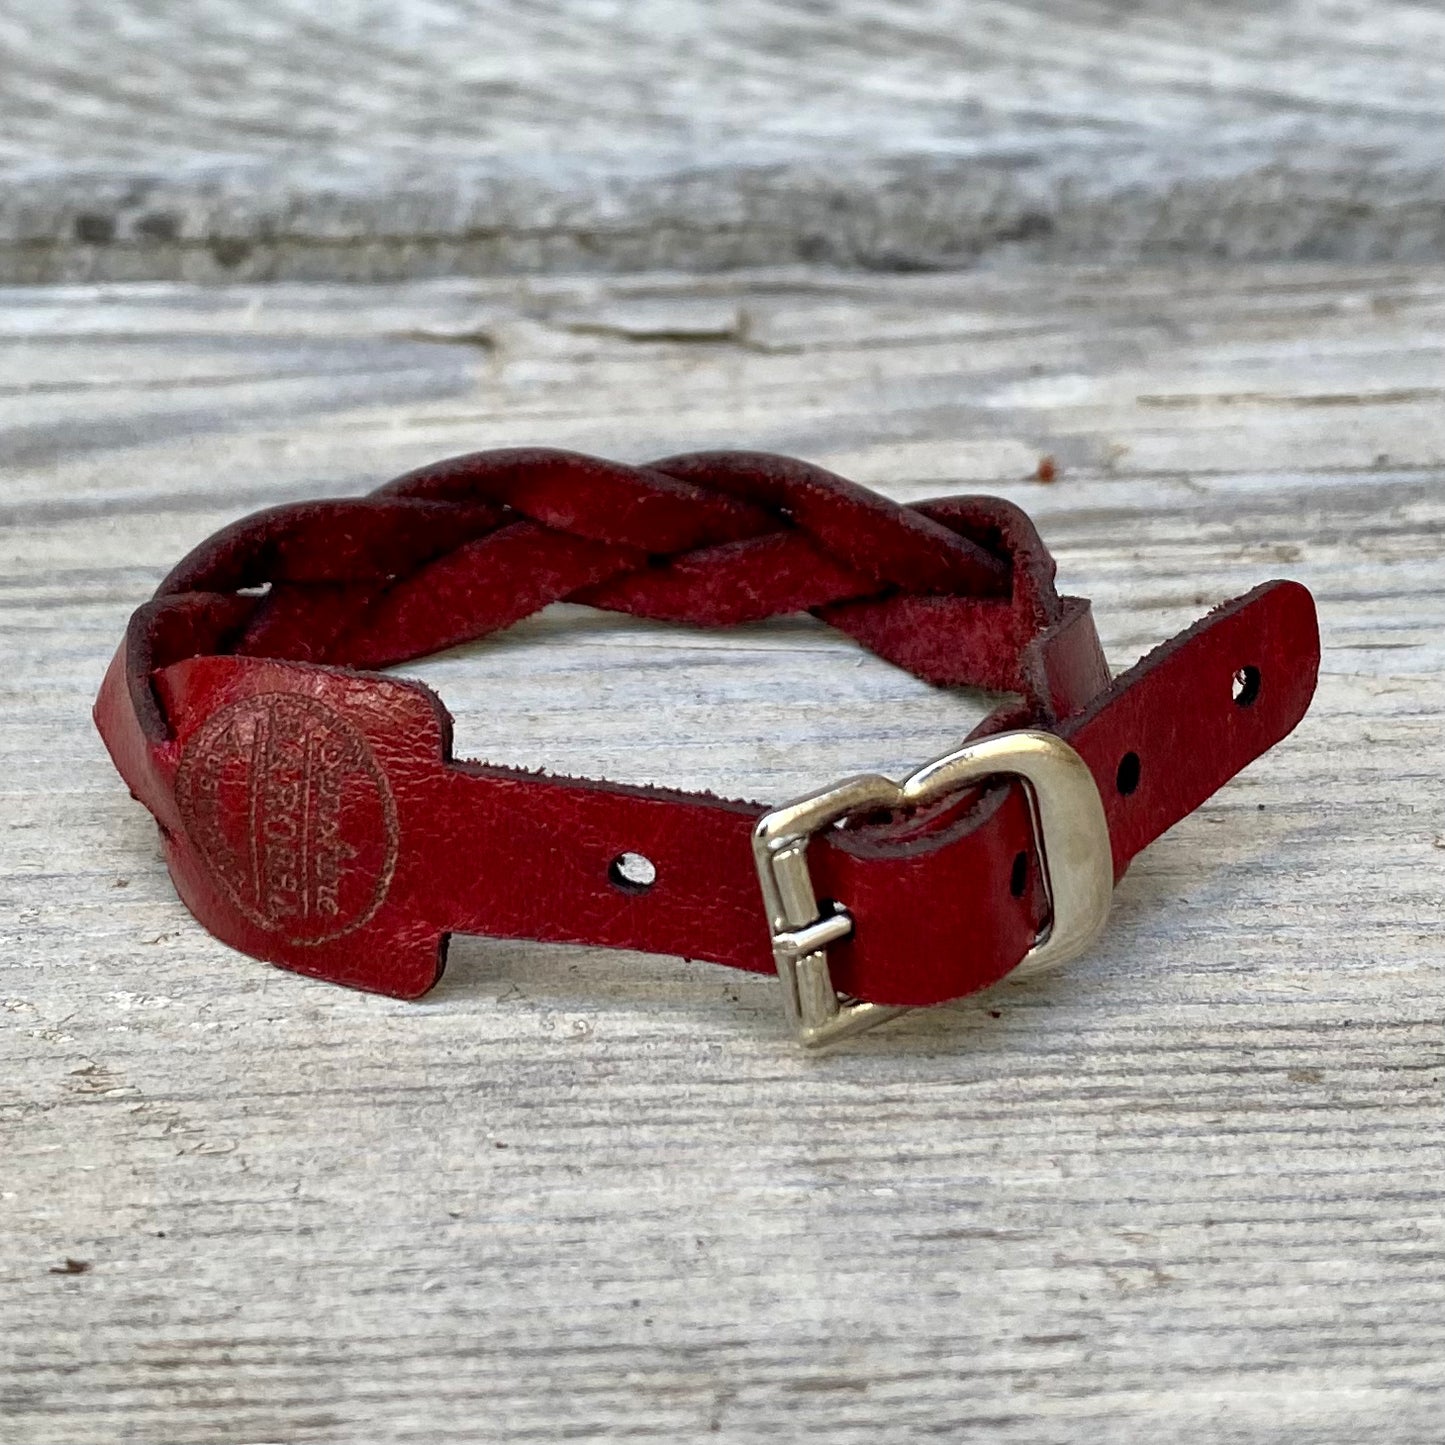 Leather Jewellery /Wrist Straps/Cuffs - Prices from $42 -$60